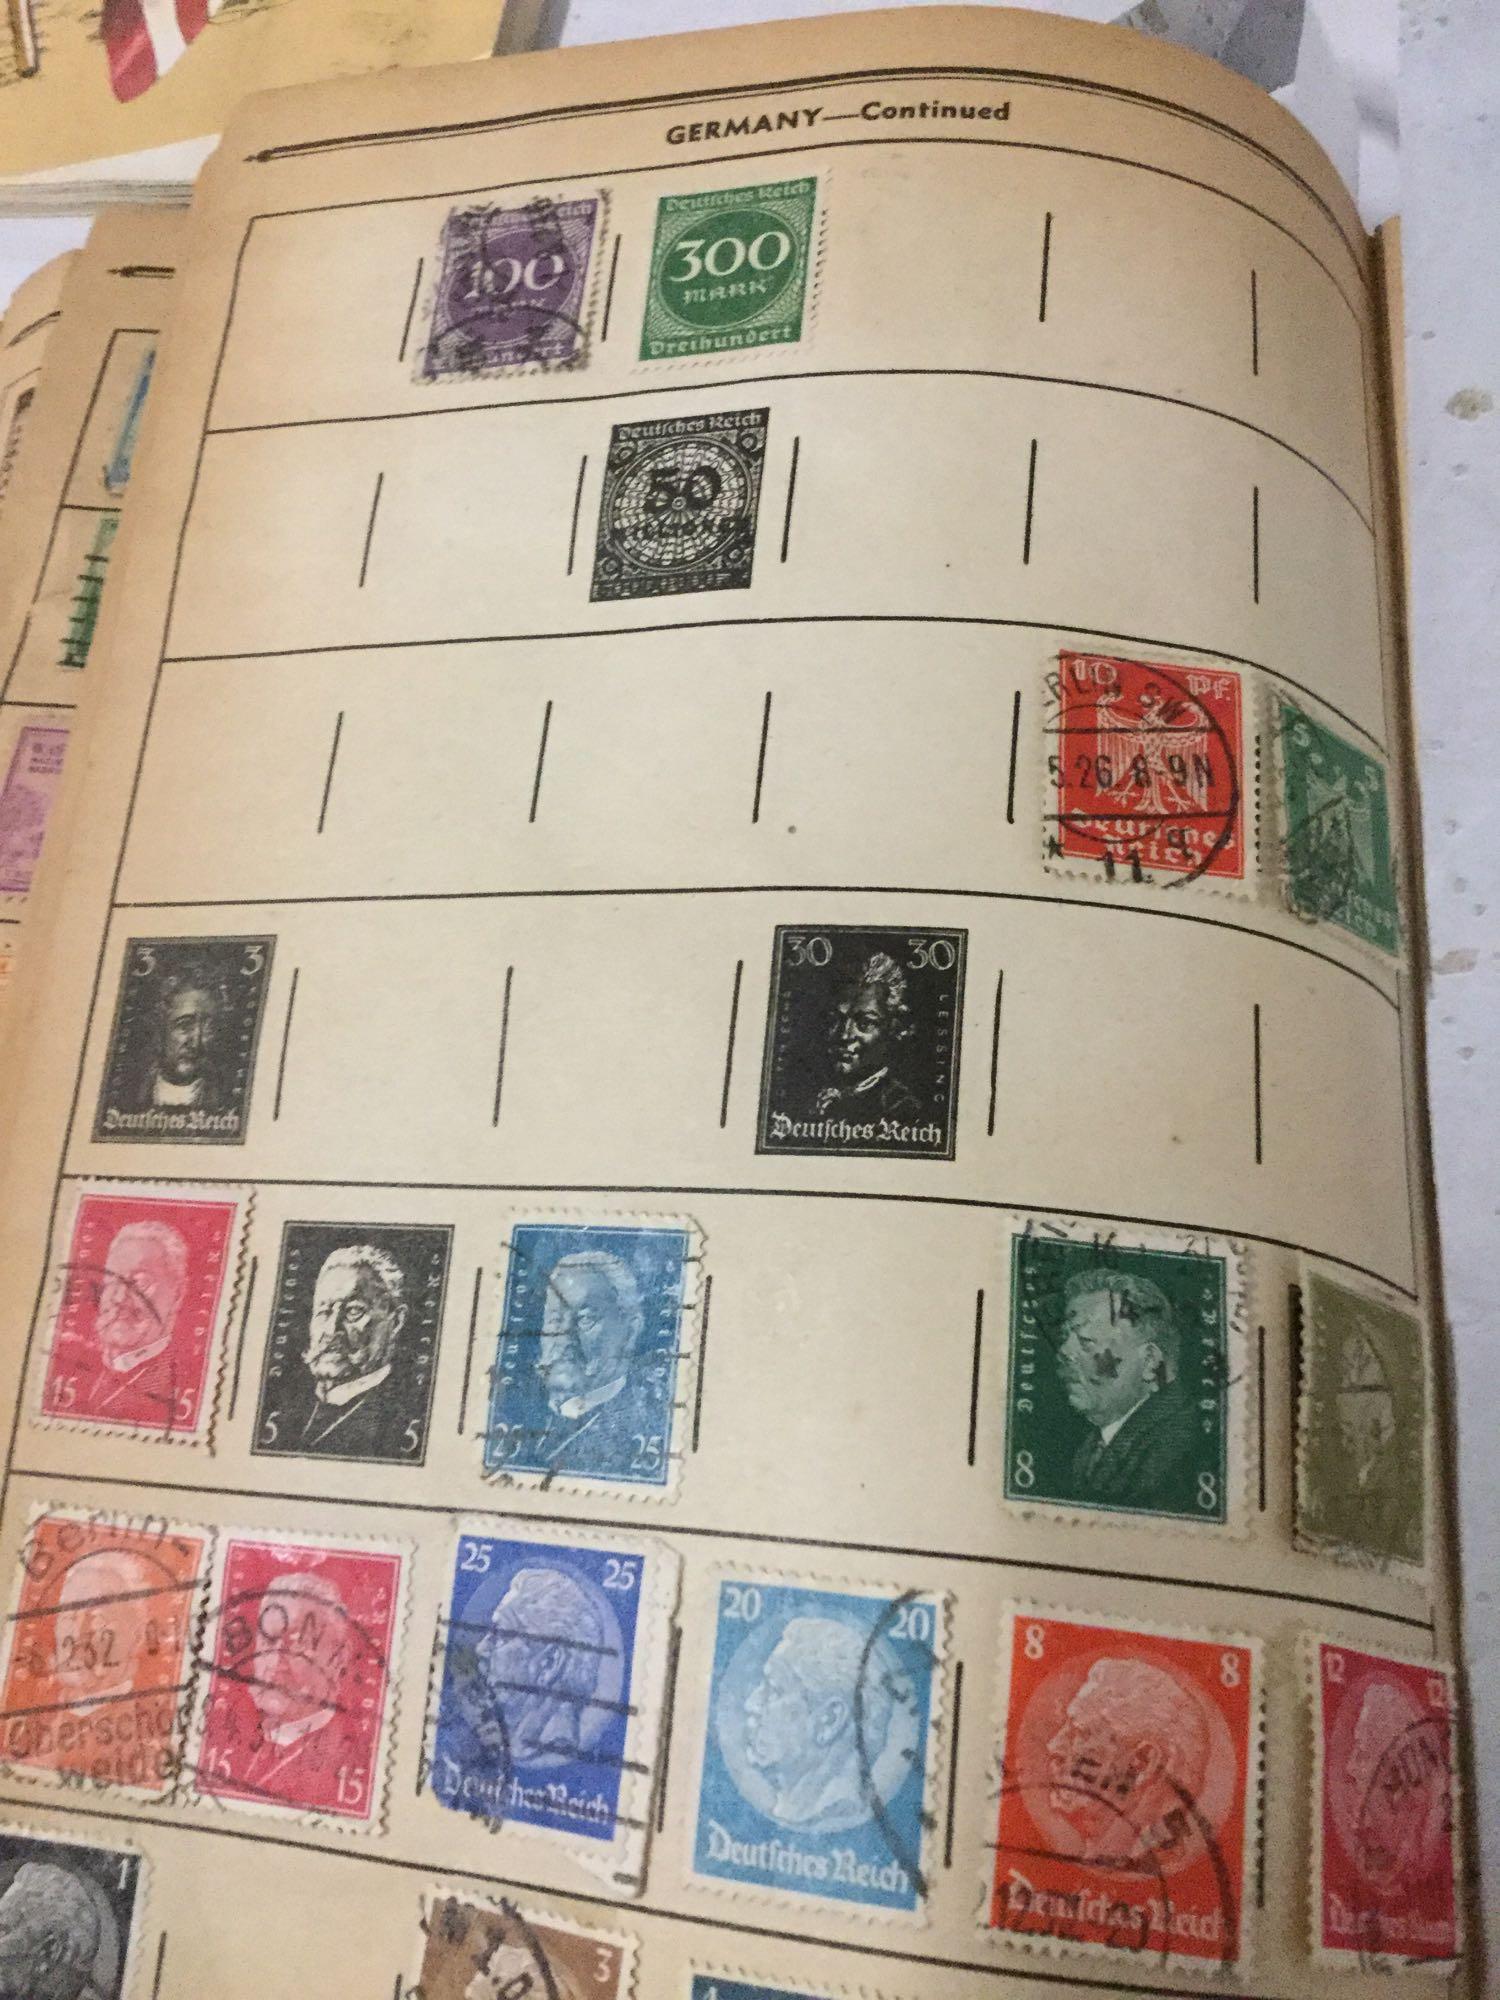 Lot of 11 stamp albums w/ various collections incl. 19th & 20th Century US stamps - see pics/desc